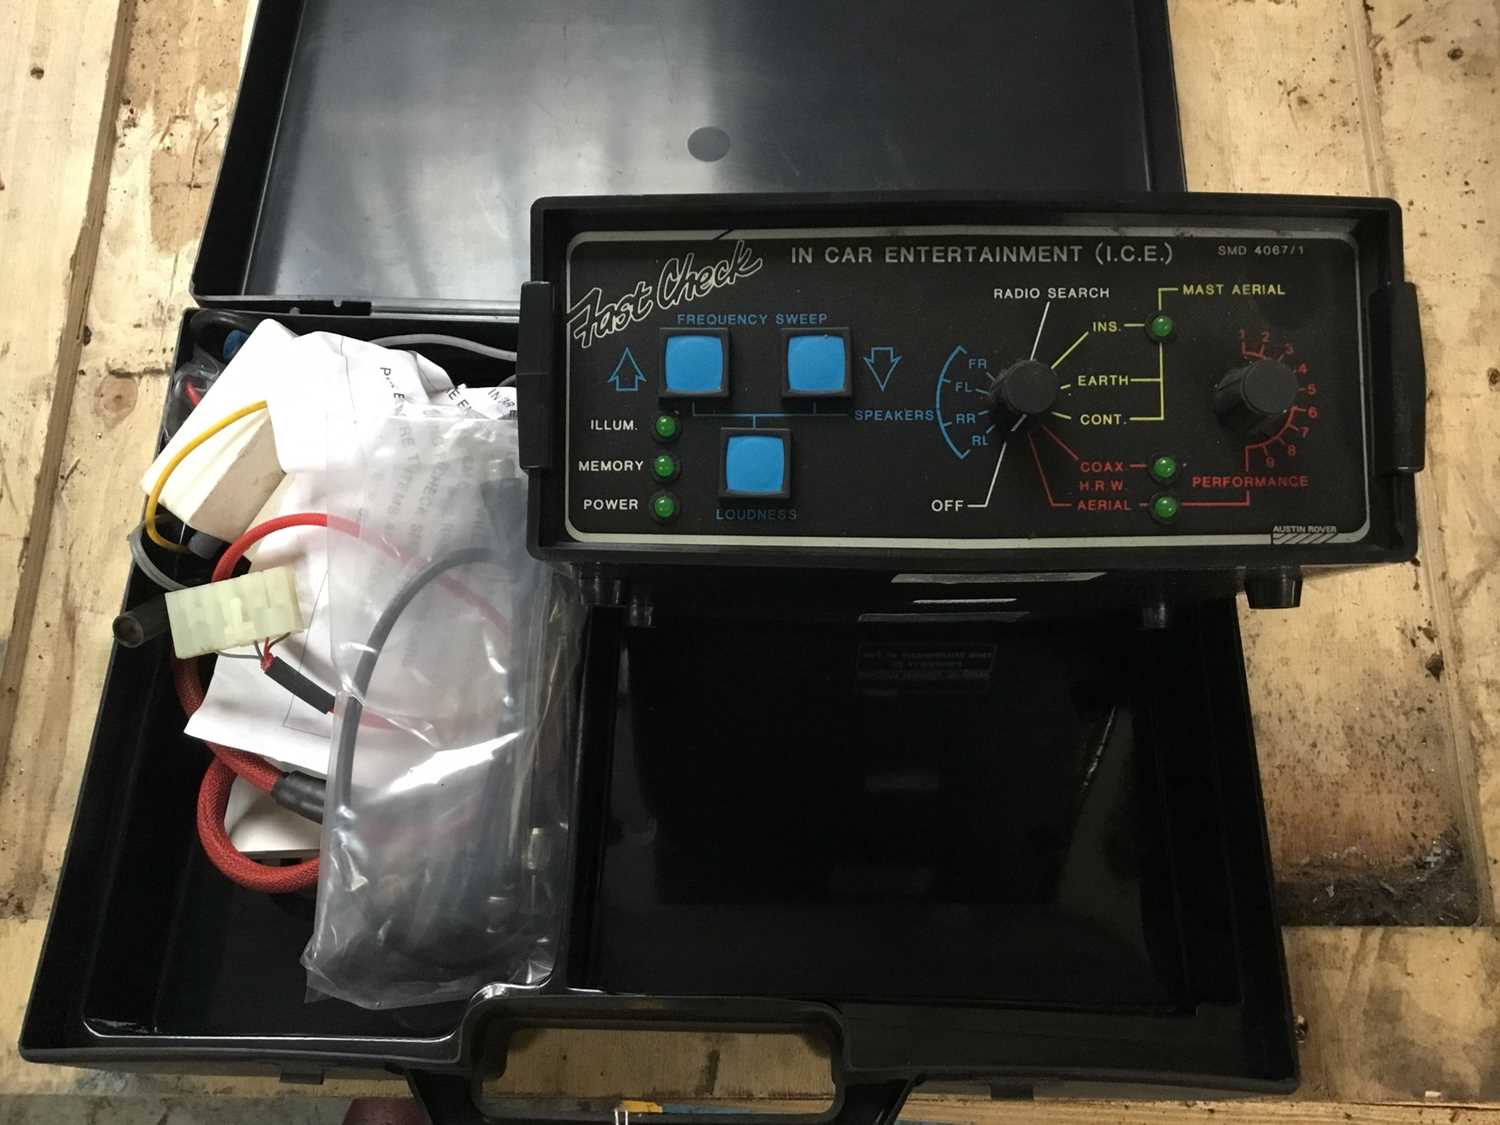 Lot 78 - Fast check in car entertainment tester, cased